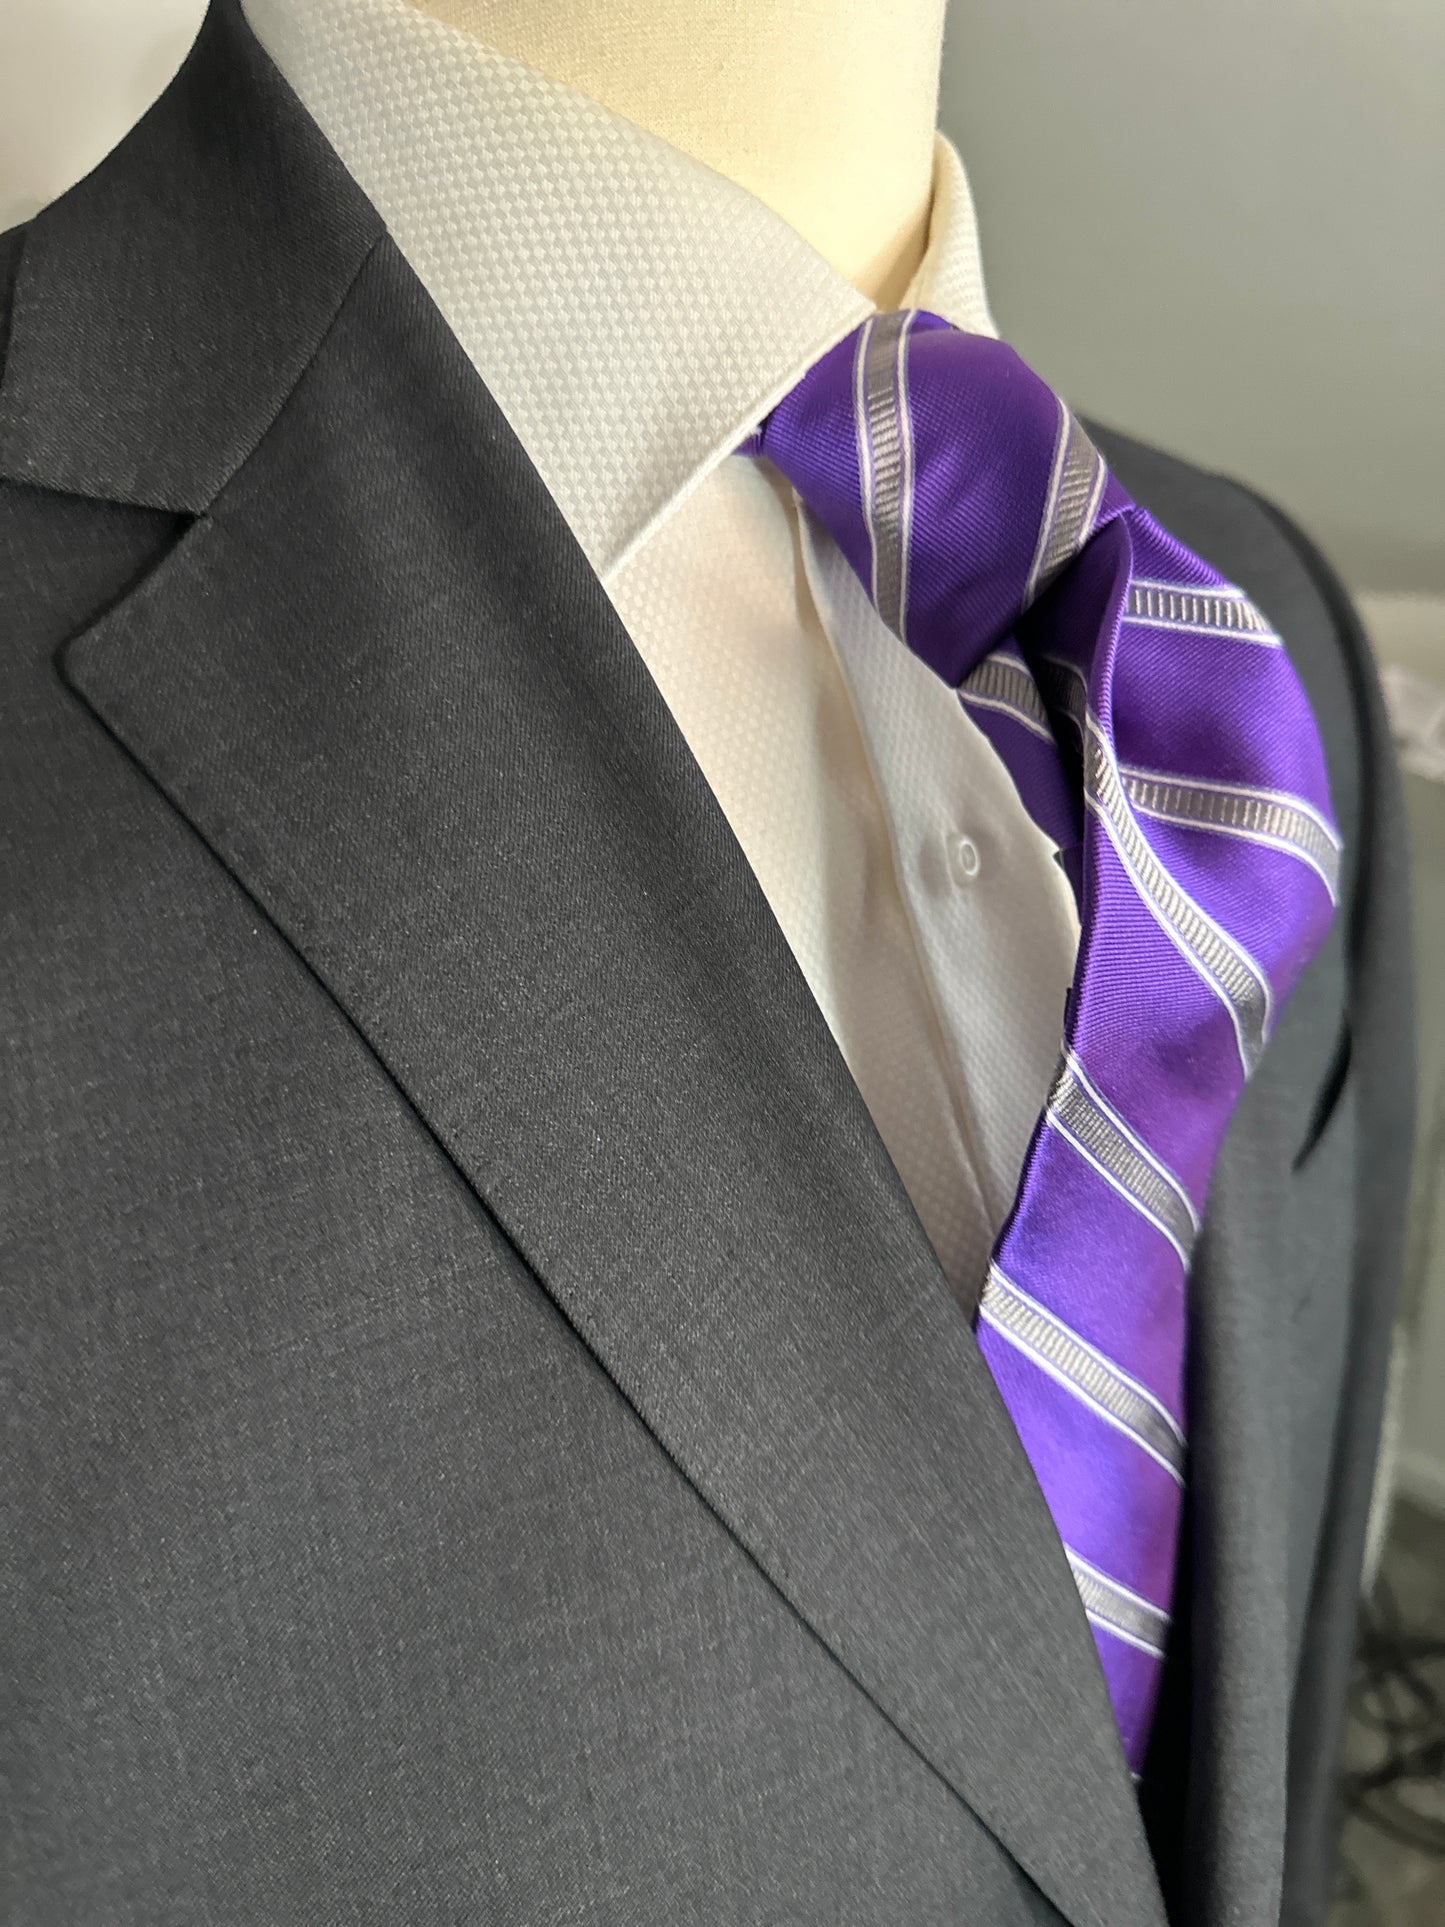 This beautiful deep purple woven silk tie with stone grey stripe pairs perfectly with a soft charcoal grey suit or navy pinstripe. For summer it would also go well with the classic tan summer suit. Try it with a navy blazer and pale grey trousers for a mid afternoon summer look.